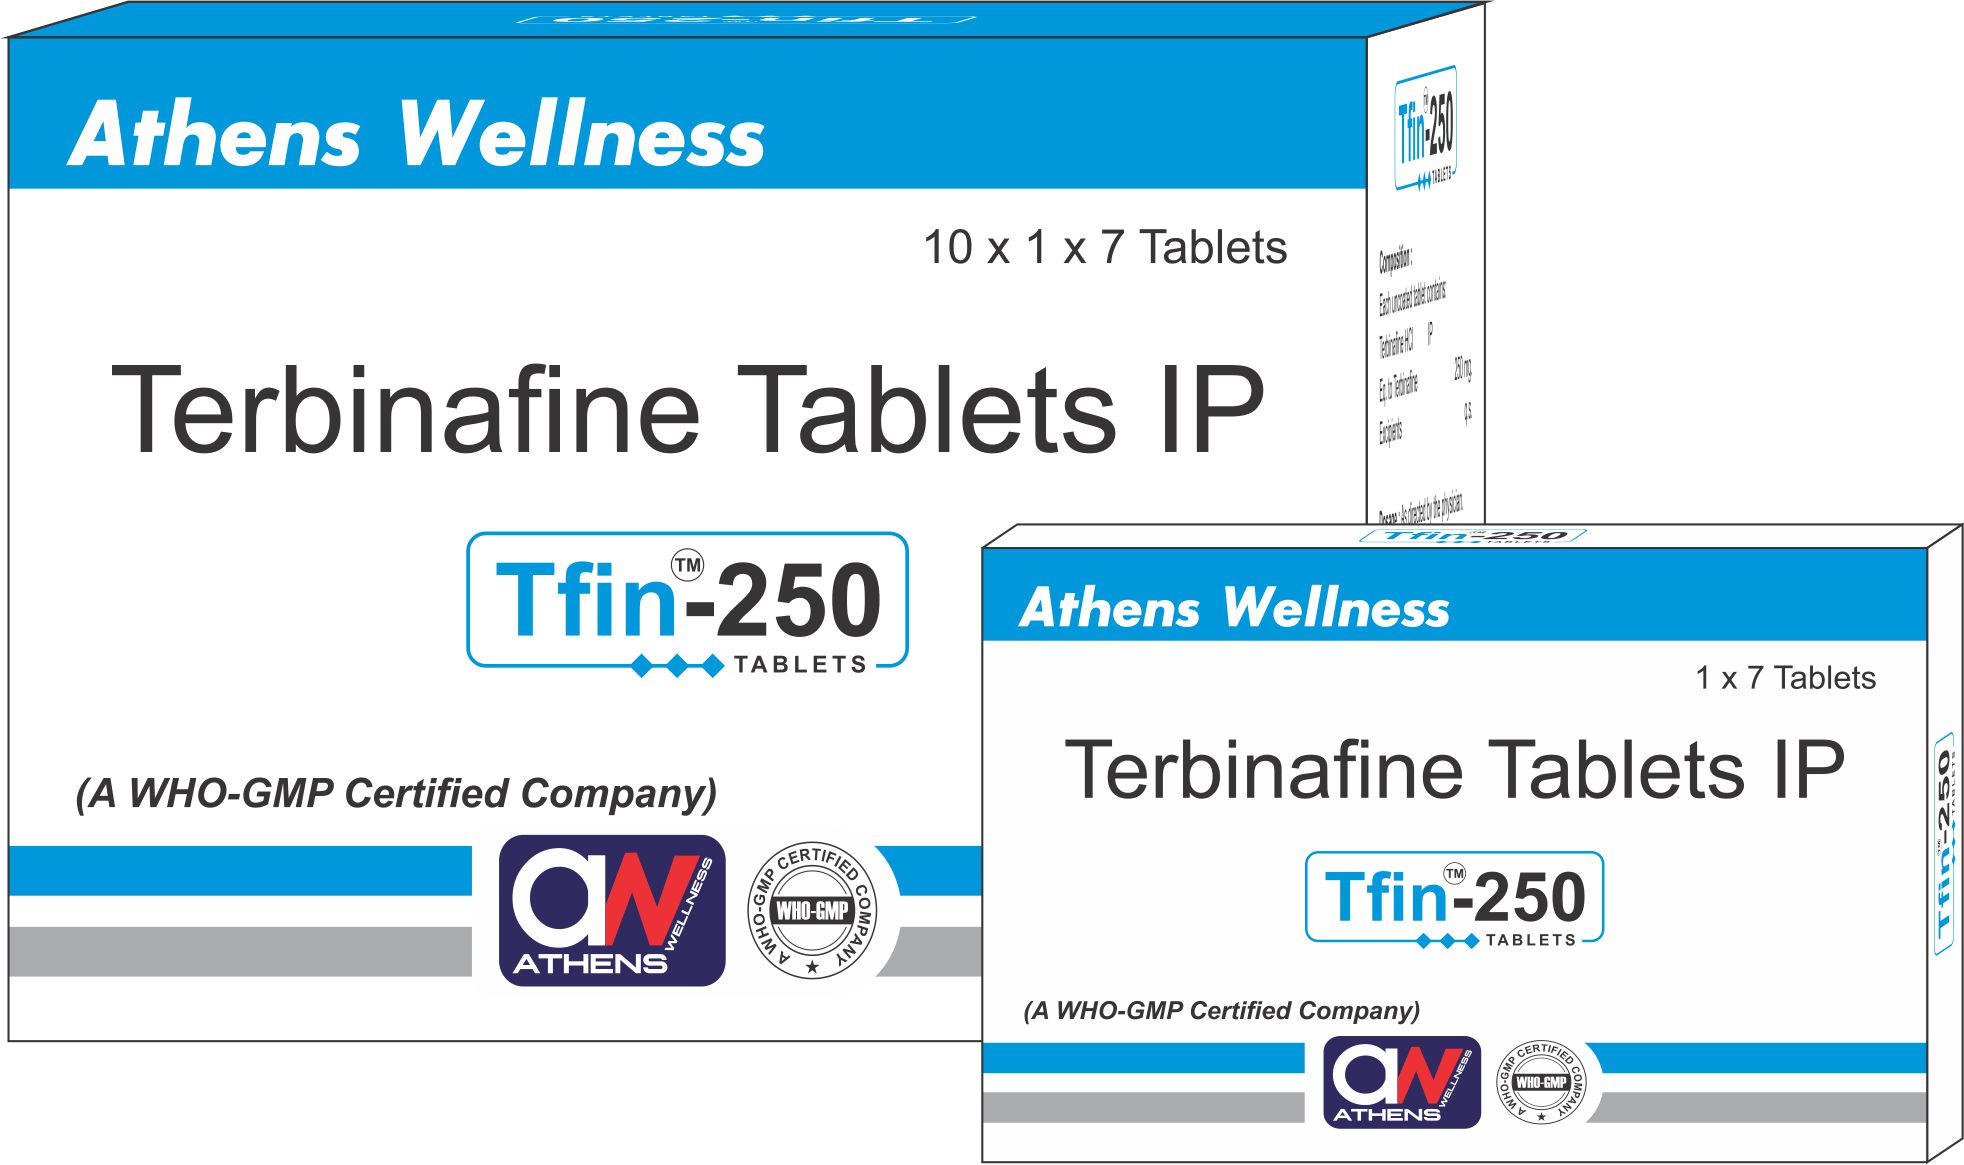 TFIN-250 TABLETS